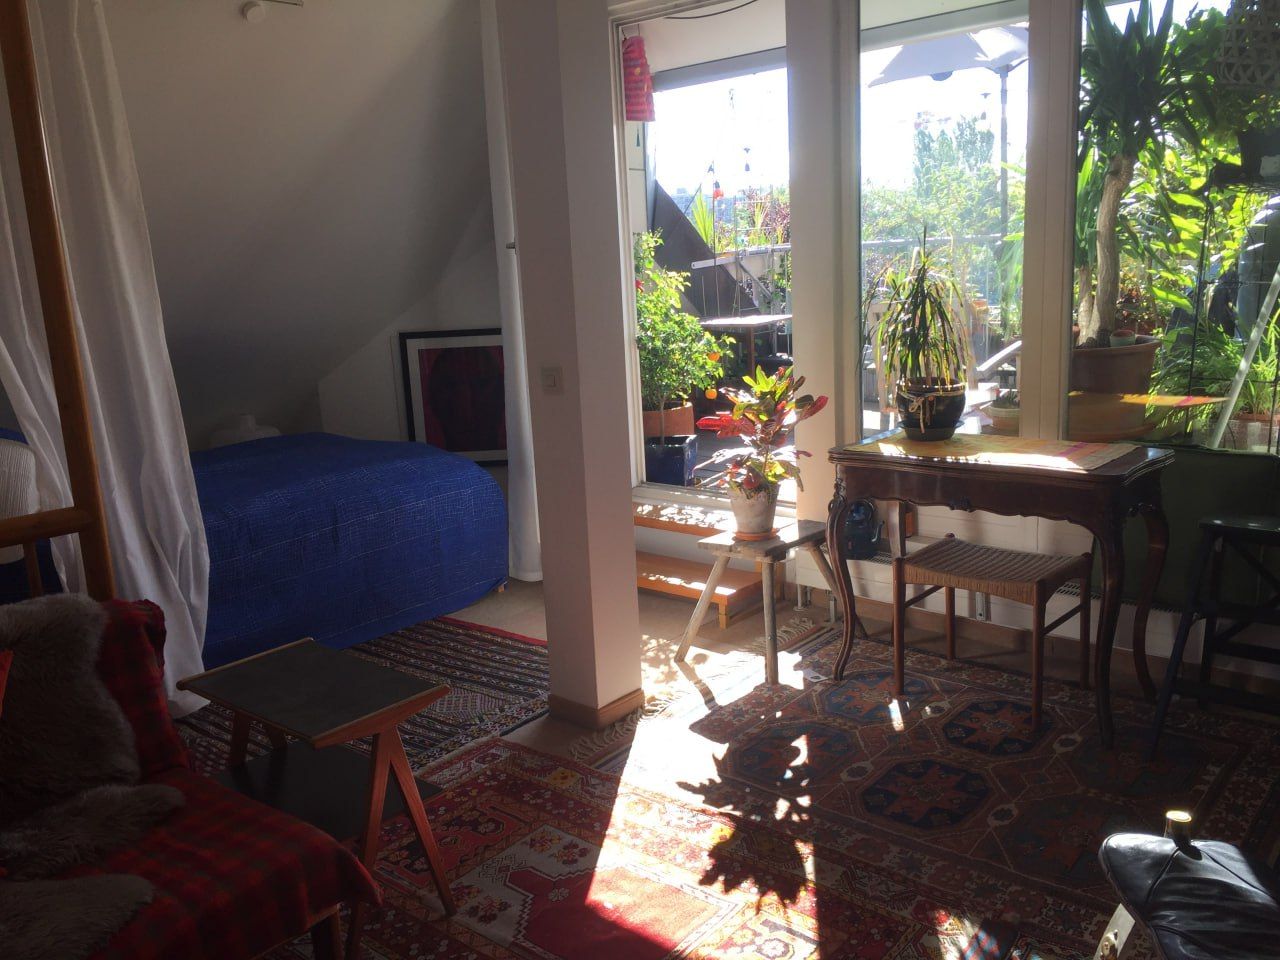 Duplex Attic Appartment with Balcony close to Isar/Munich